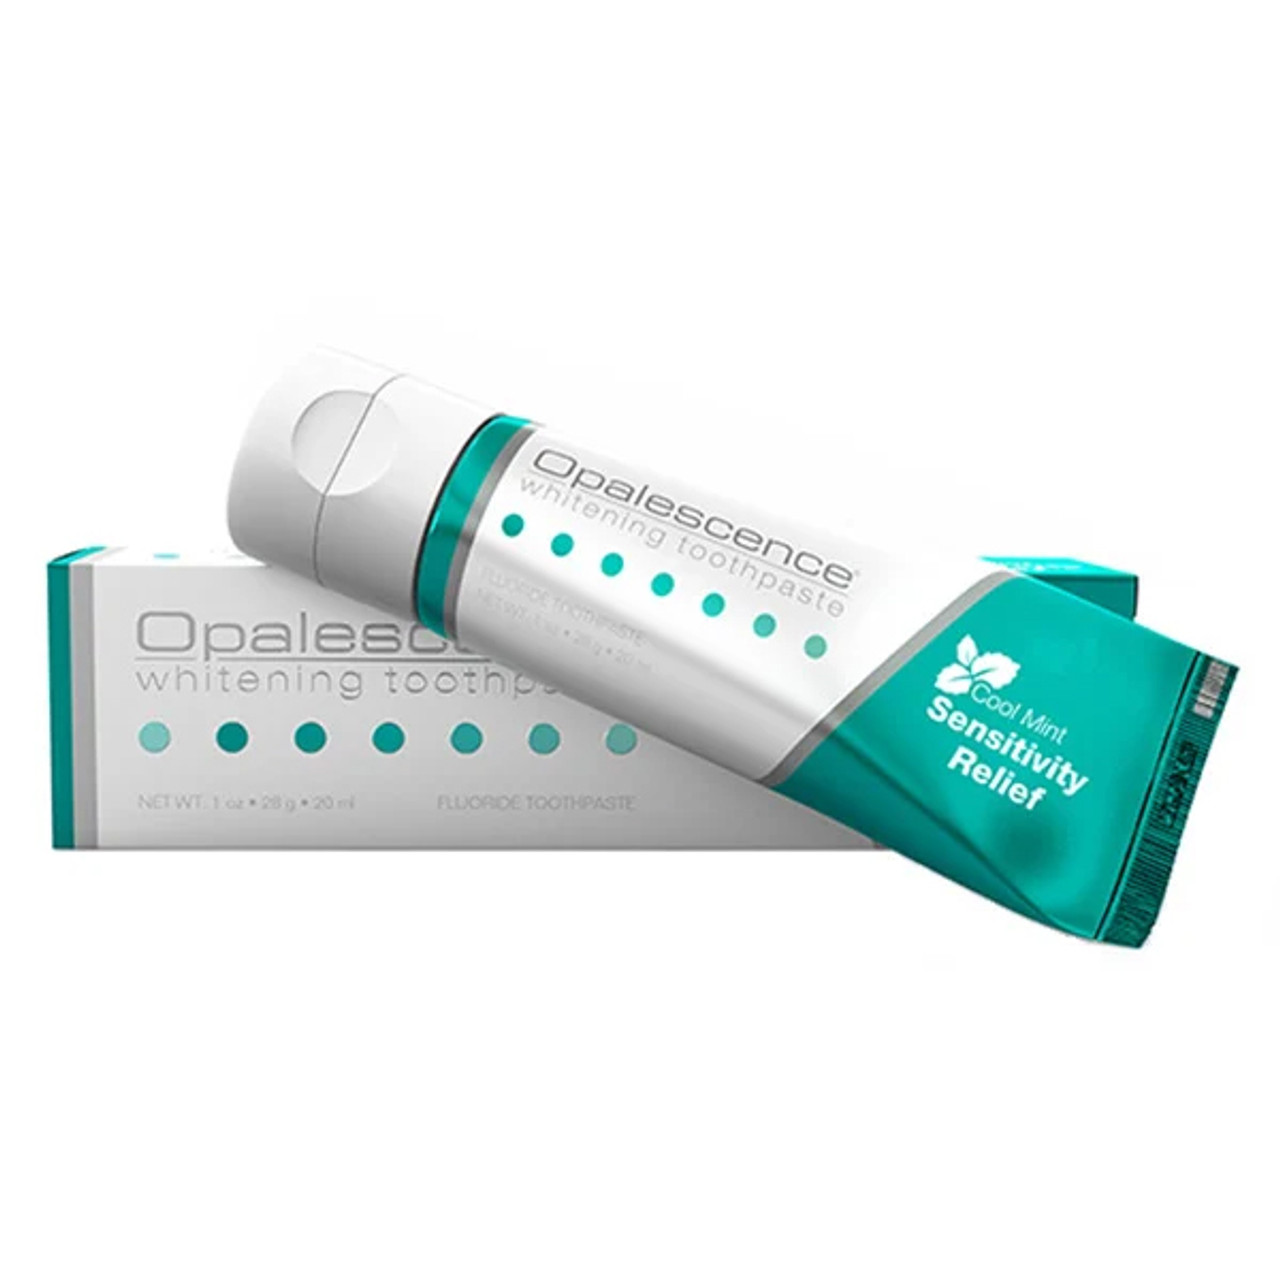 https://cdn11.bigcommerce.com/s-xk4uicgdlw/images/stencil/1280x1280/products/27425/60028/opalescence-sensitivity-relief-whitening-toothpaste-original-12x-d-169897__53964.1693369305.jpg?c=2